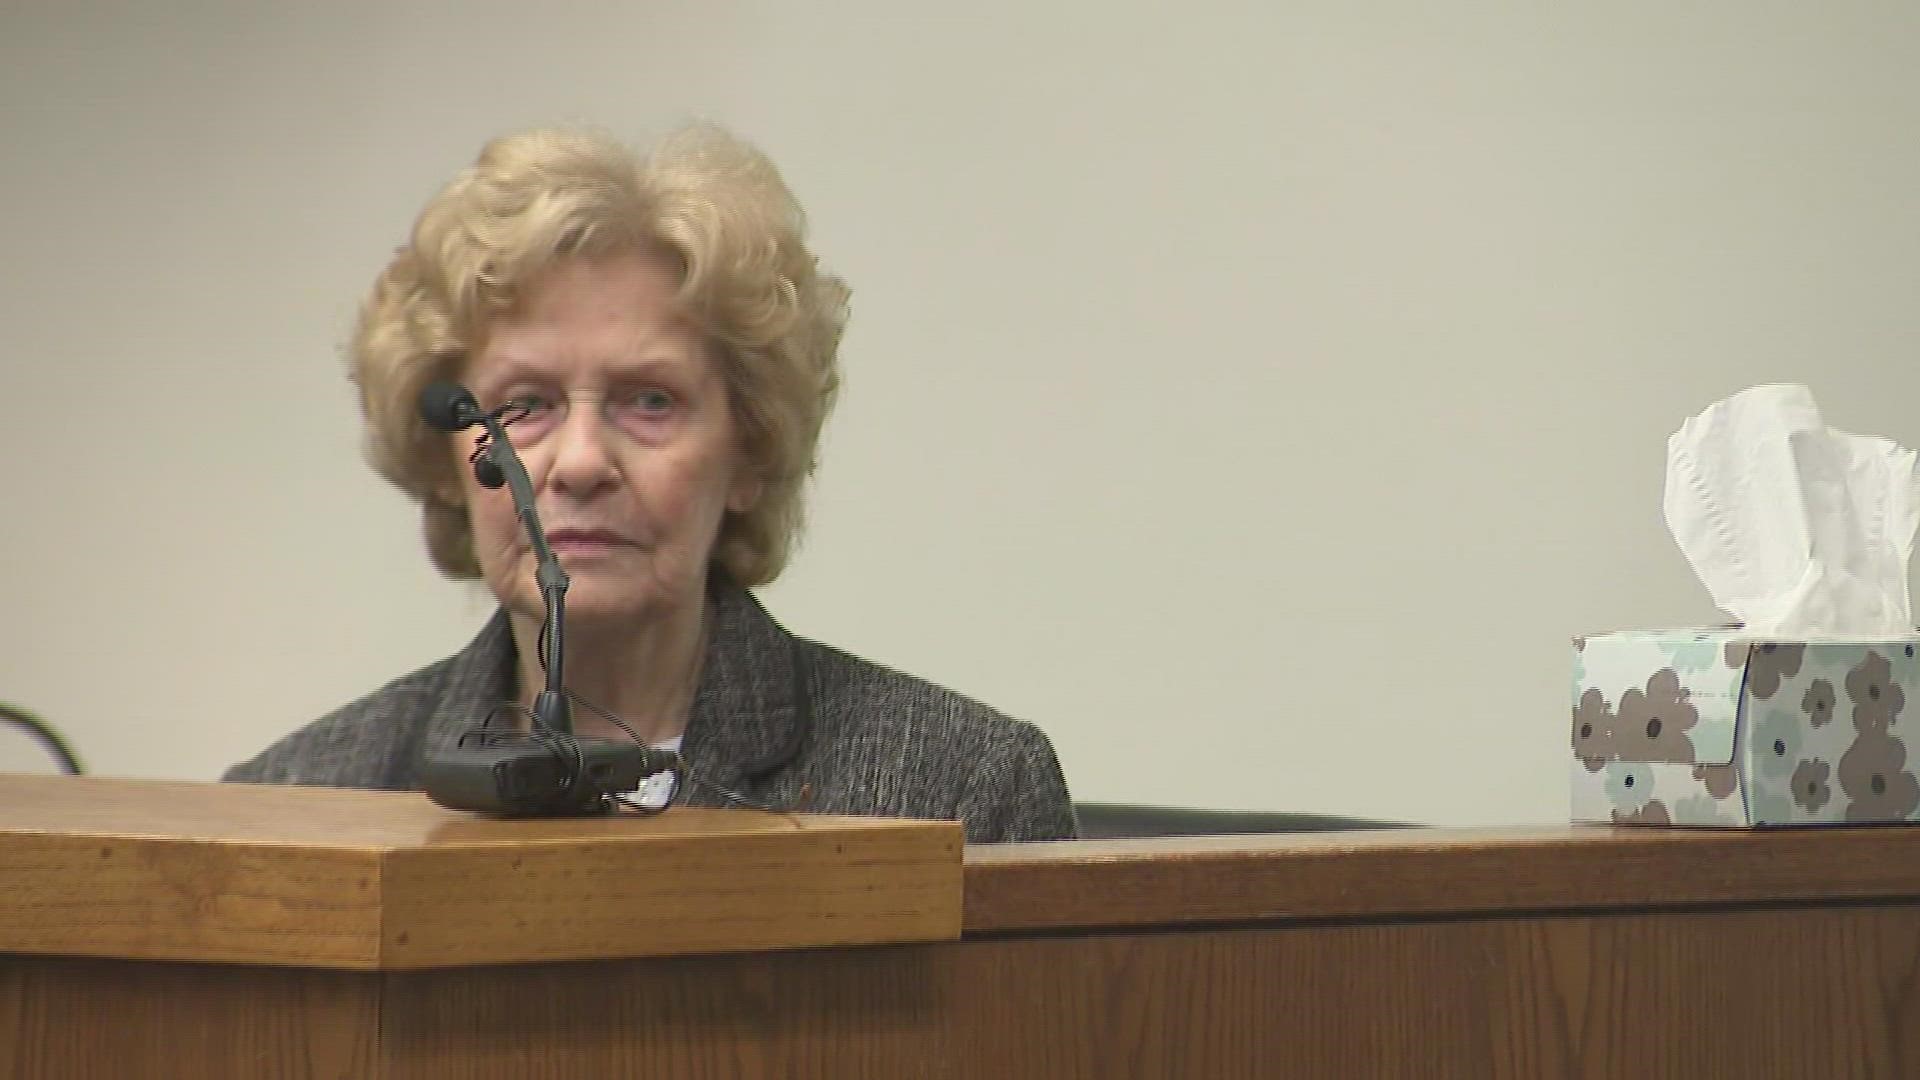 The grandmother of the 2018 Dixon High School shooting testifies at her grandson's sentencing hearing and provides personal insights on her grandson.